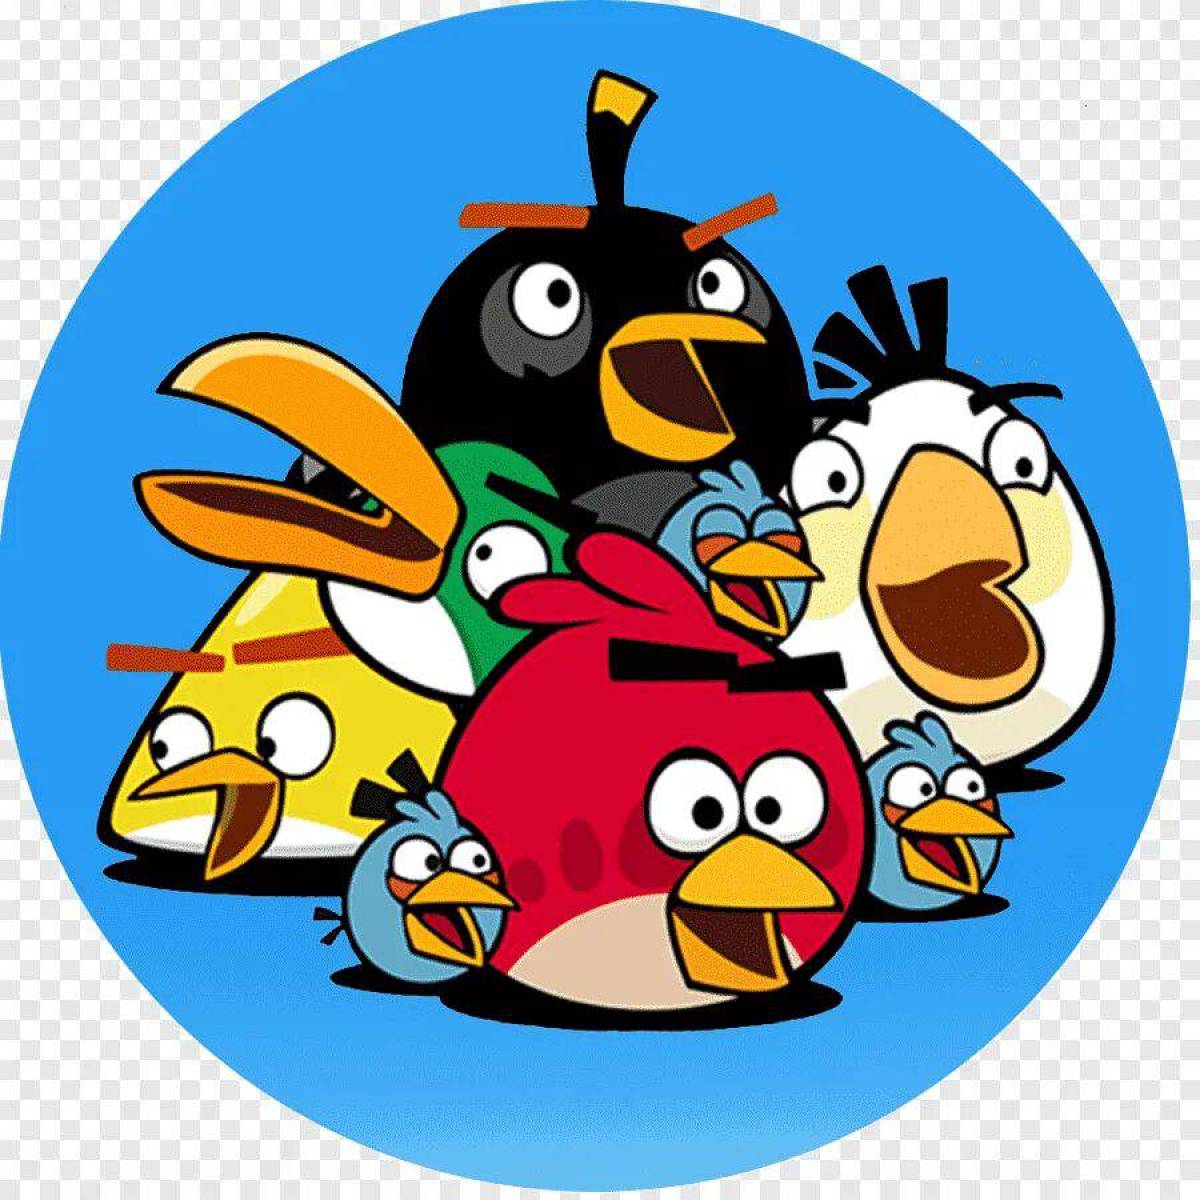 Angry birds #24